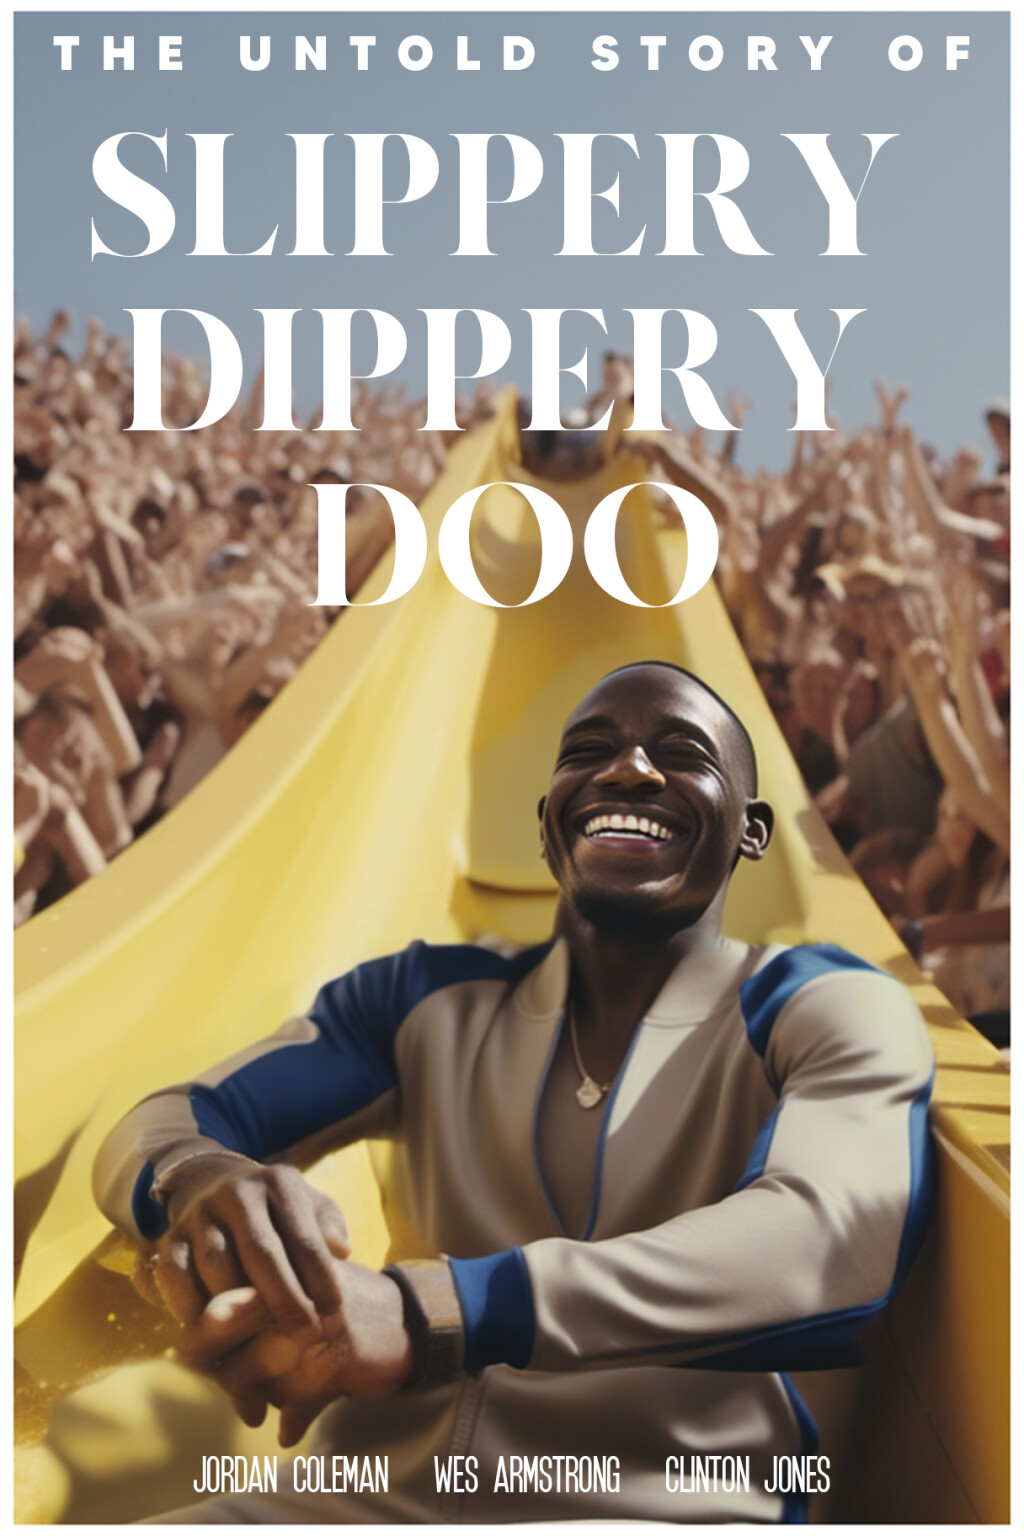 Filmposter for The Untold Story of Slippery Dippery Doo